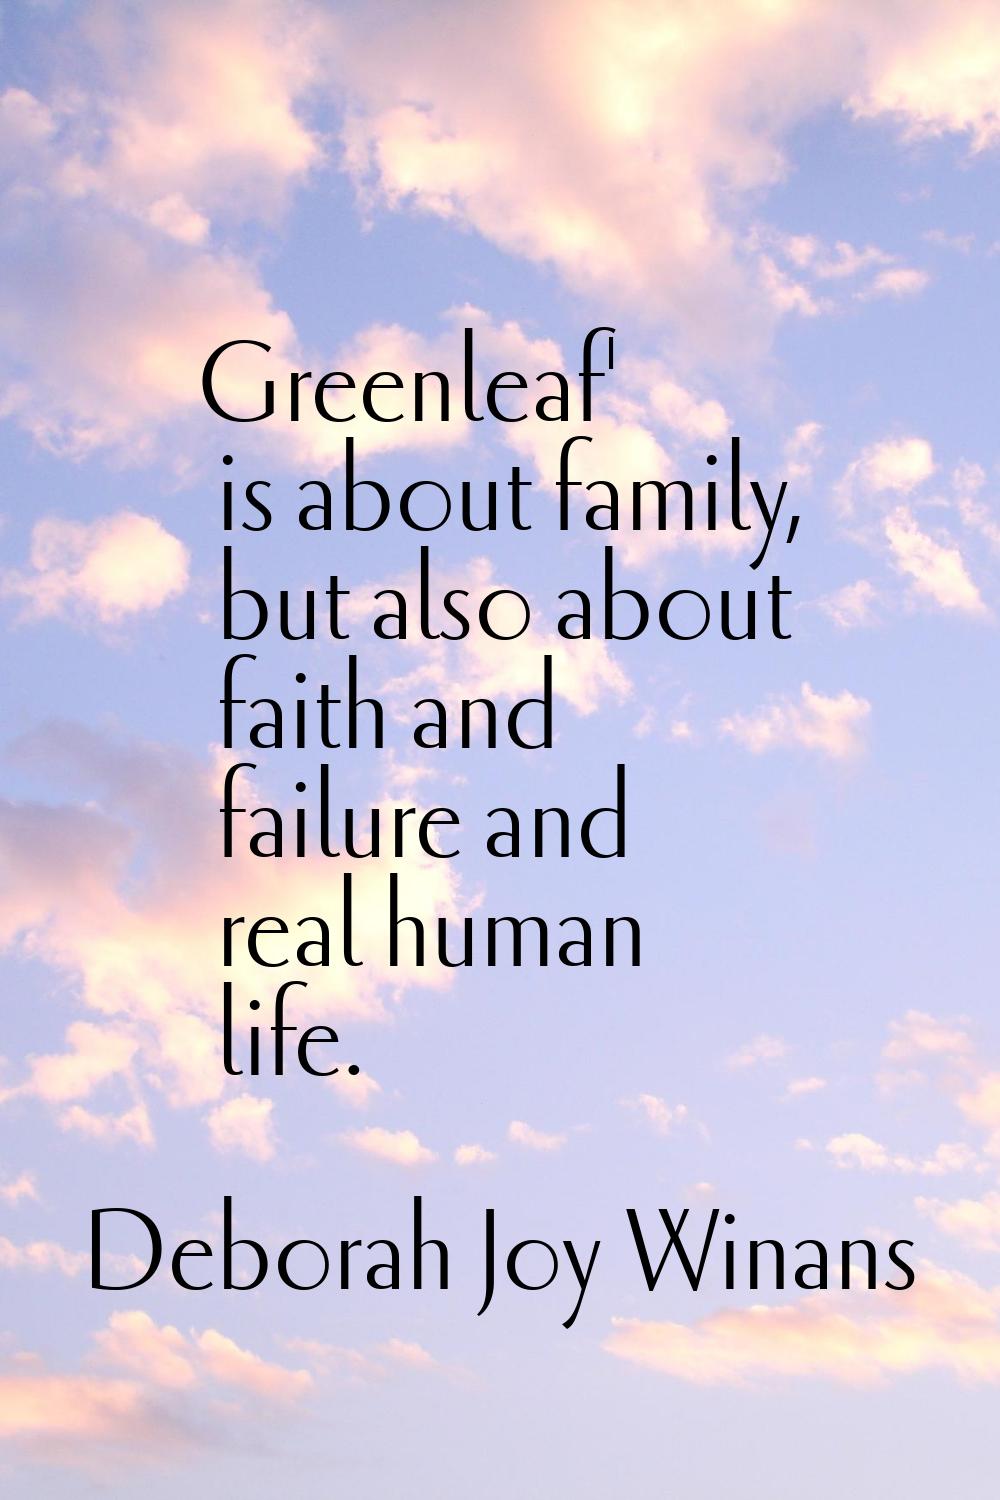 Greenleaf' is about family, but also about faith and failure and real human life.